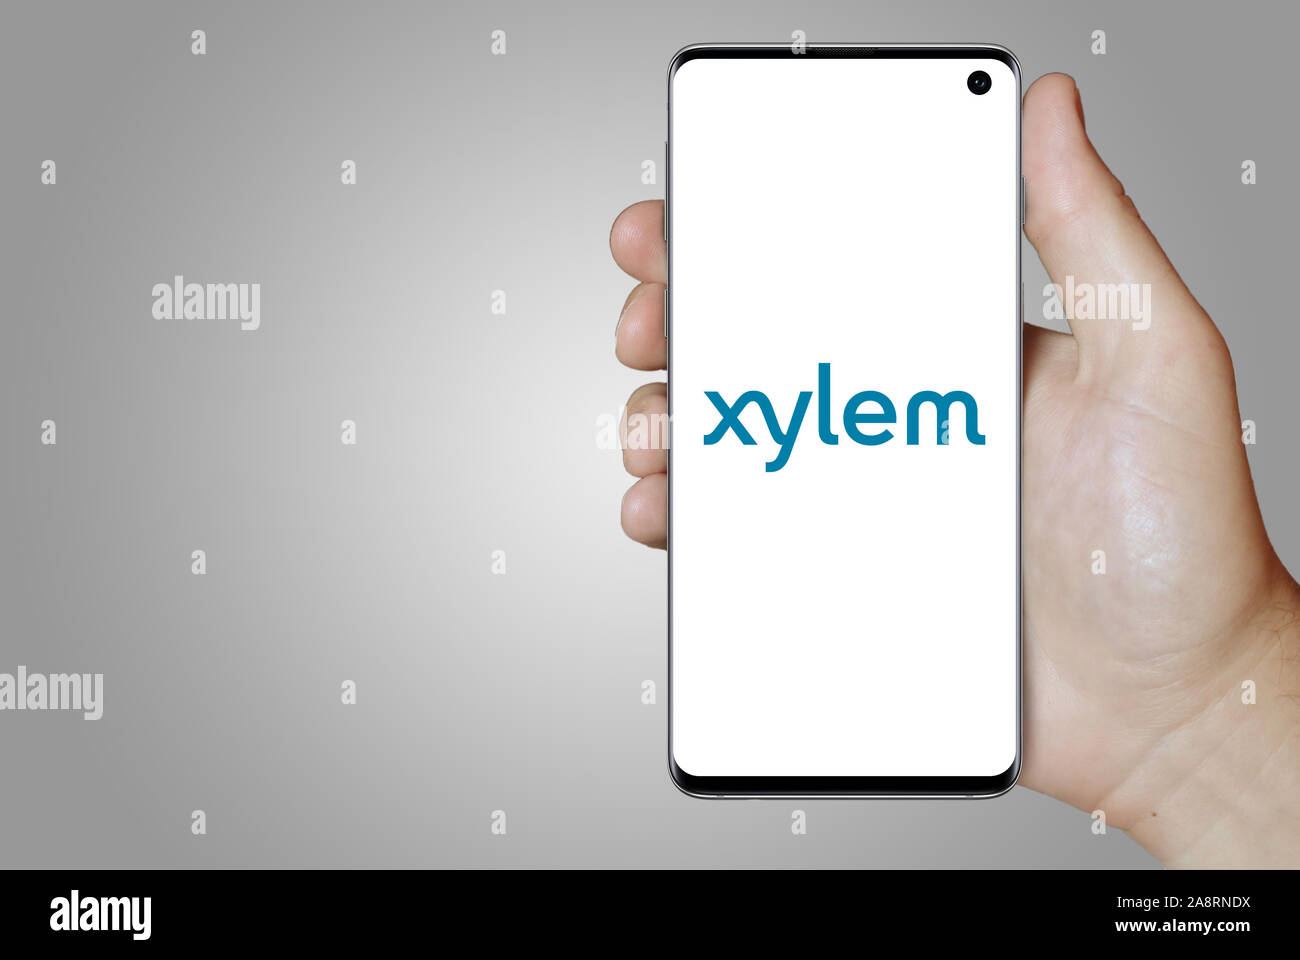 Xylem logo in transparent PNG and vectorized SVG formats